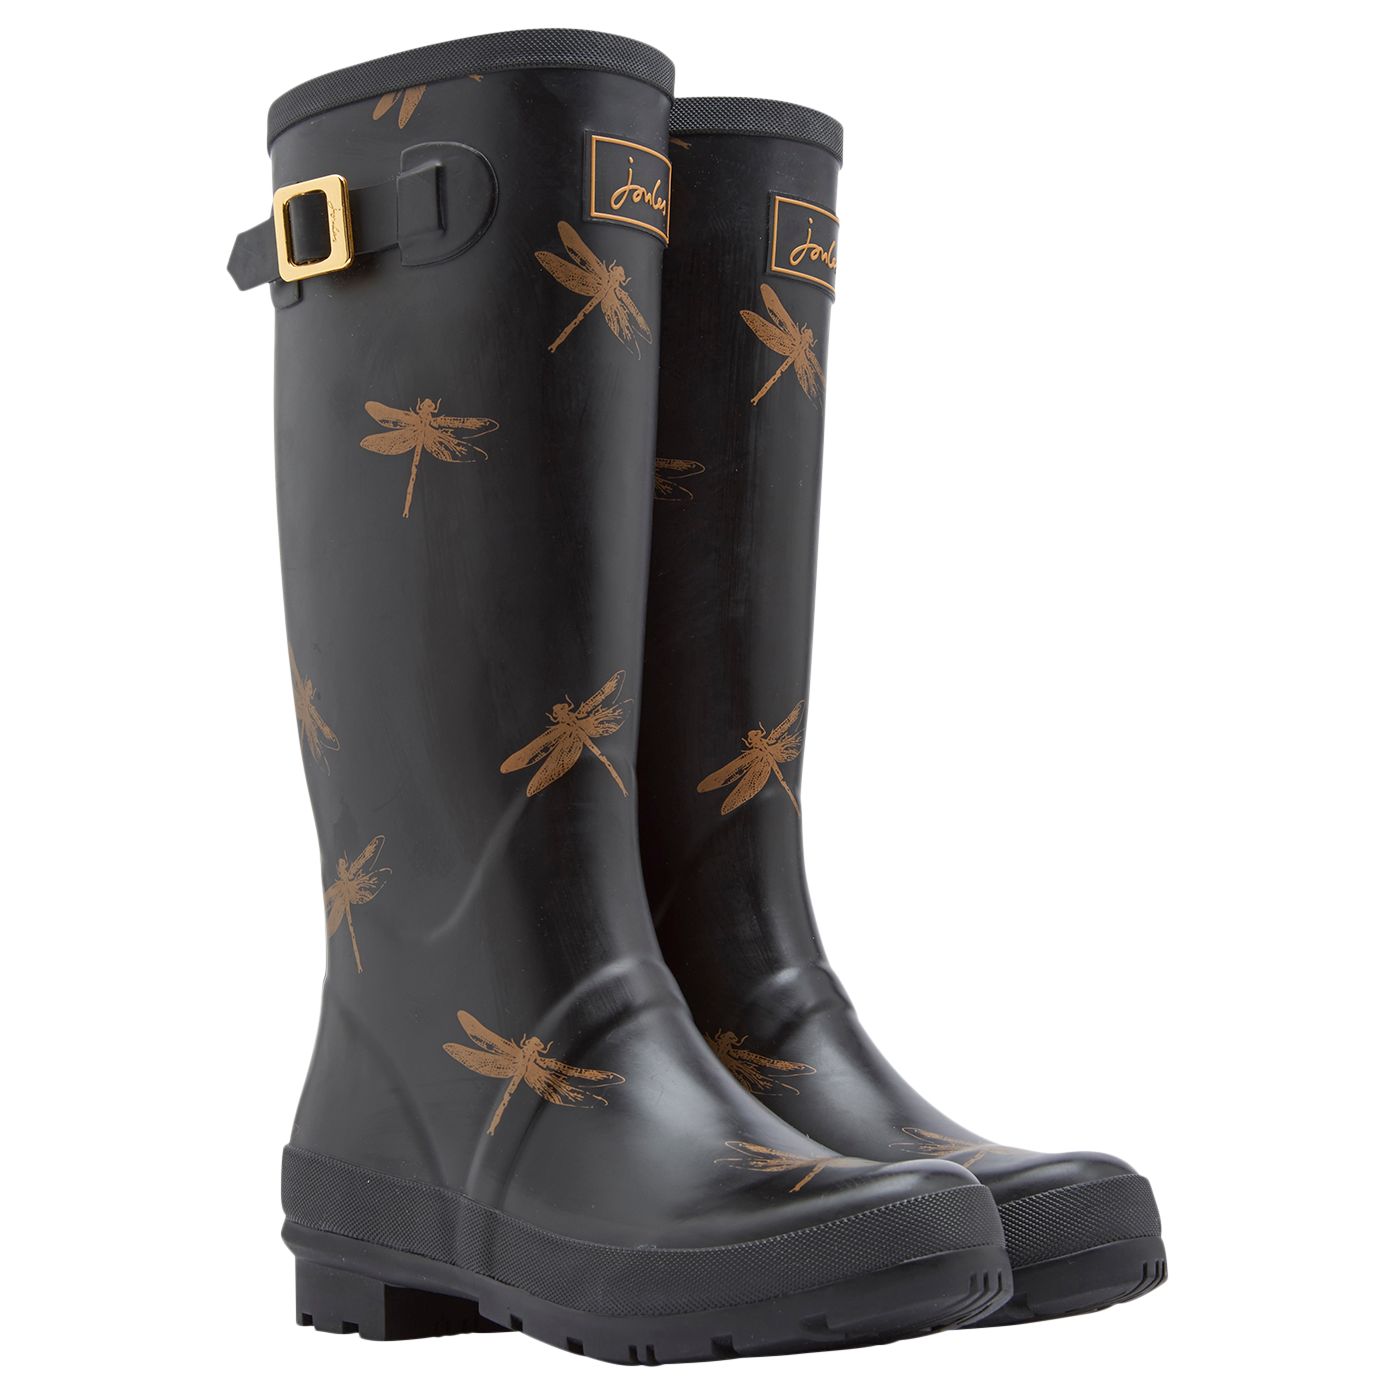 Joules Tall Dragonfly Rubber Wellington Boots, Black